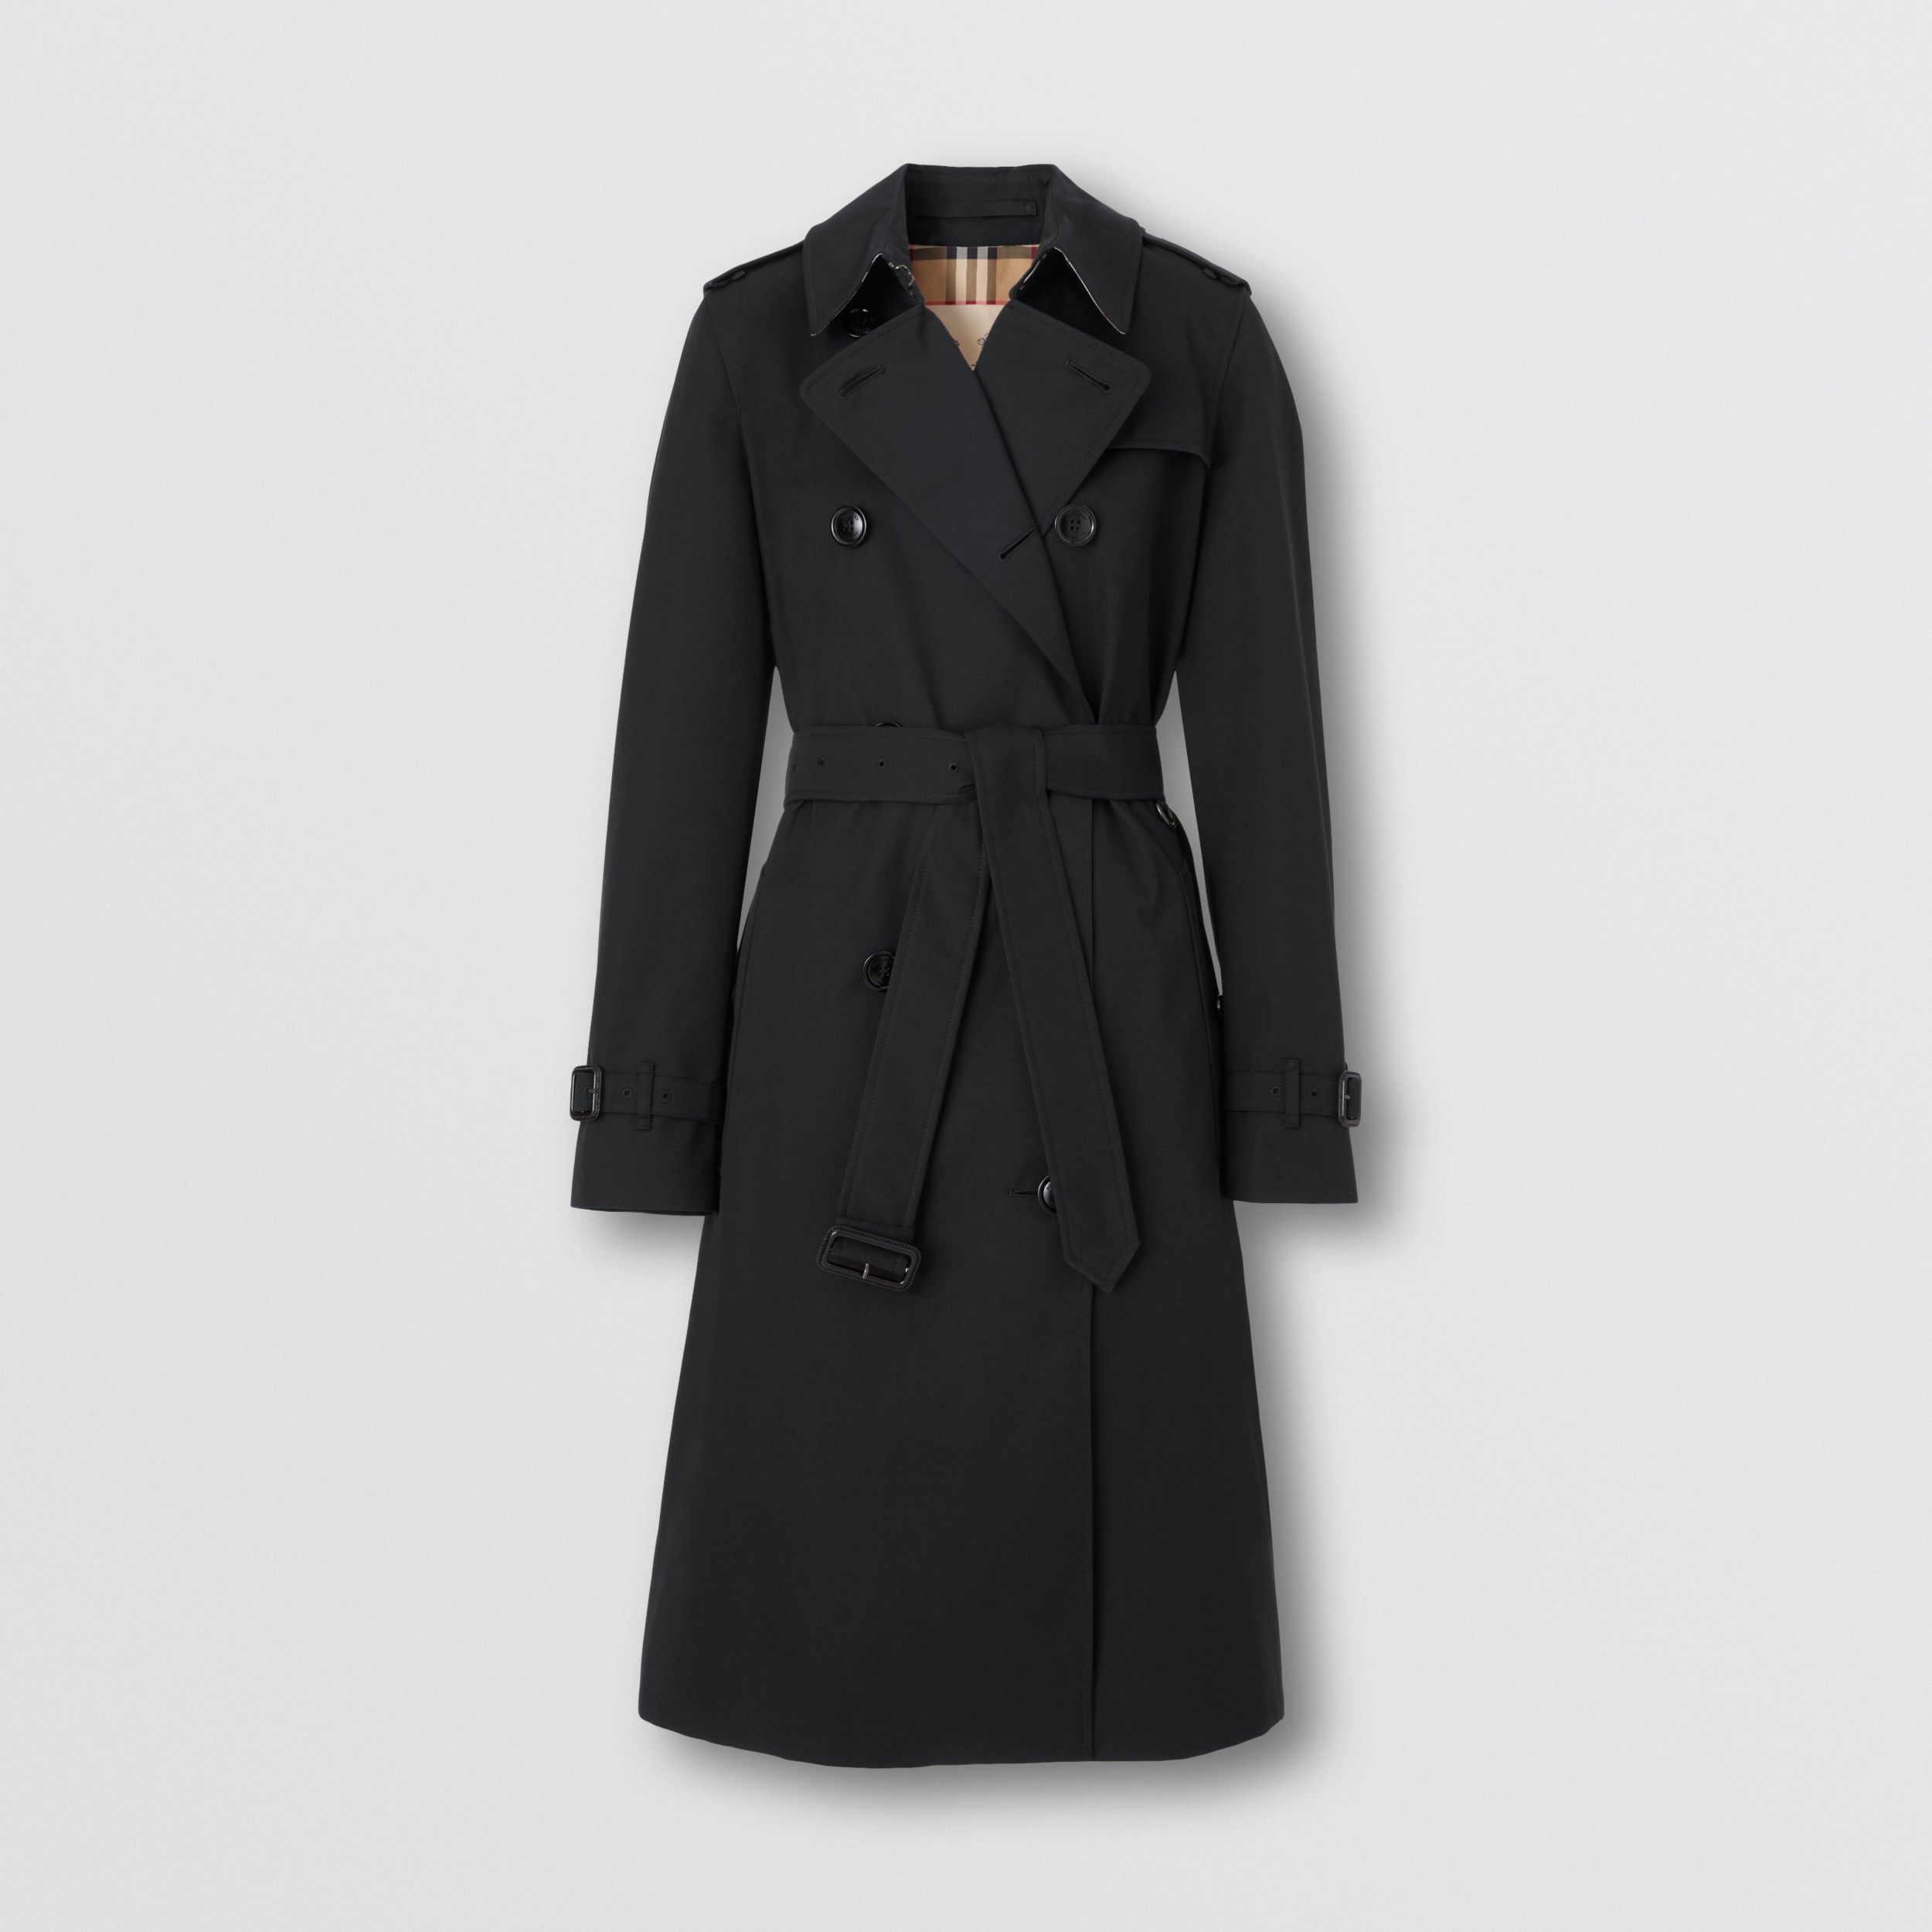 In detail scared dedication burberry heritage trench coat assassination ...